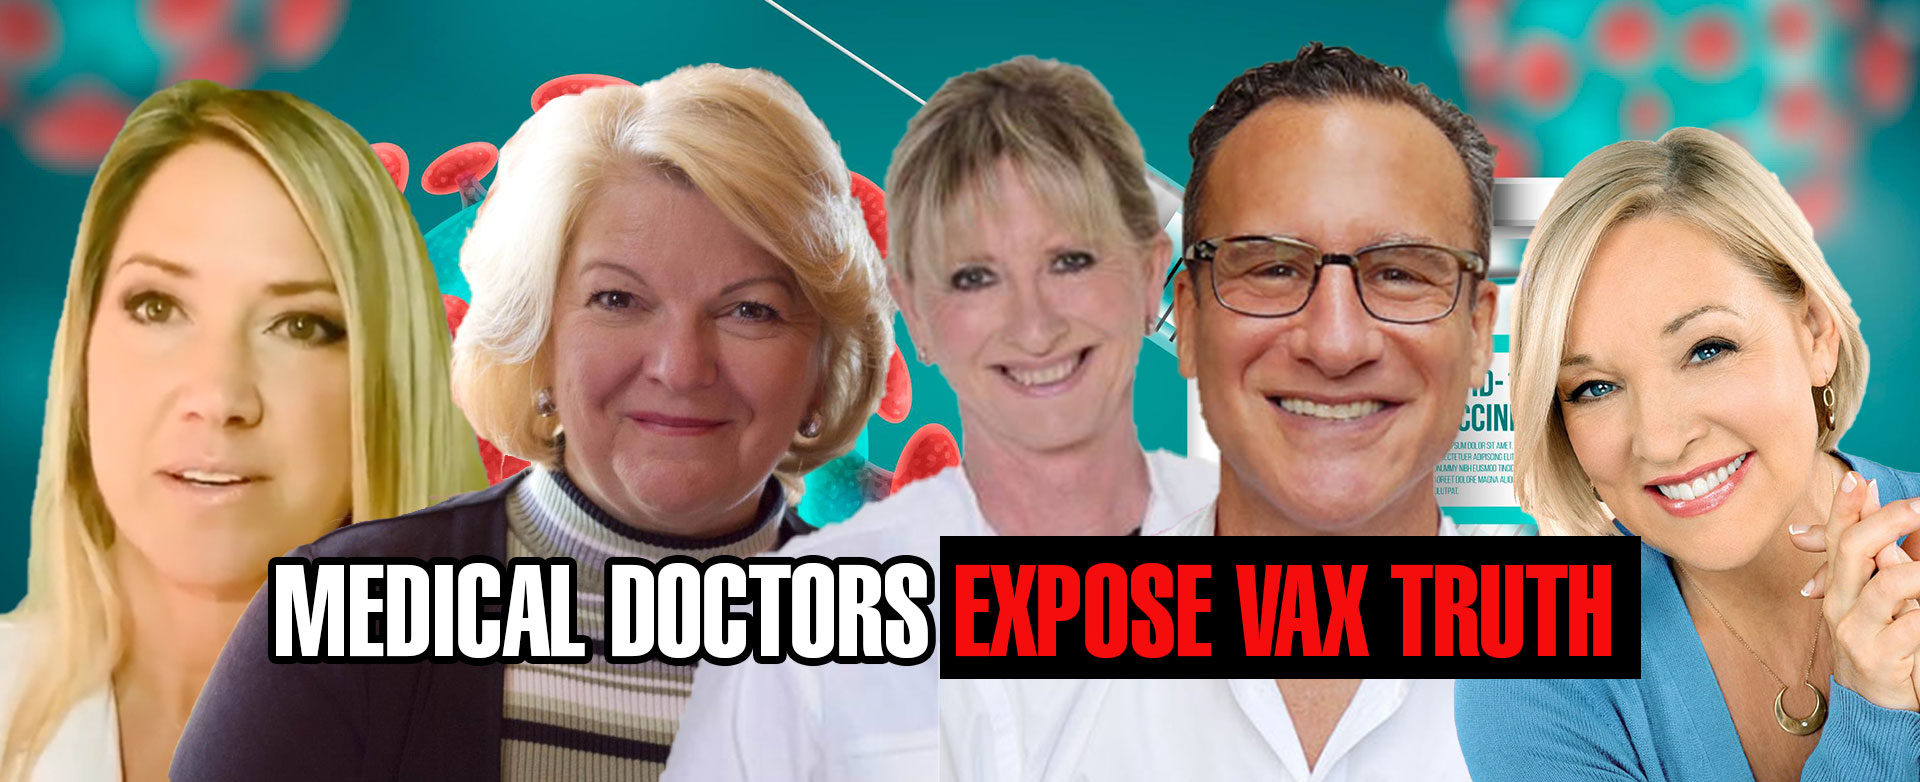 MyPariotsNetwork-Medical Doctors Expose Vax Truth & What Can Be Done About It! – May 4, 2021 Update